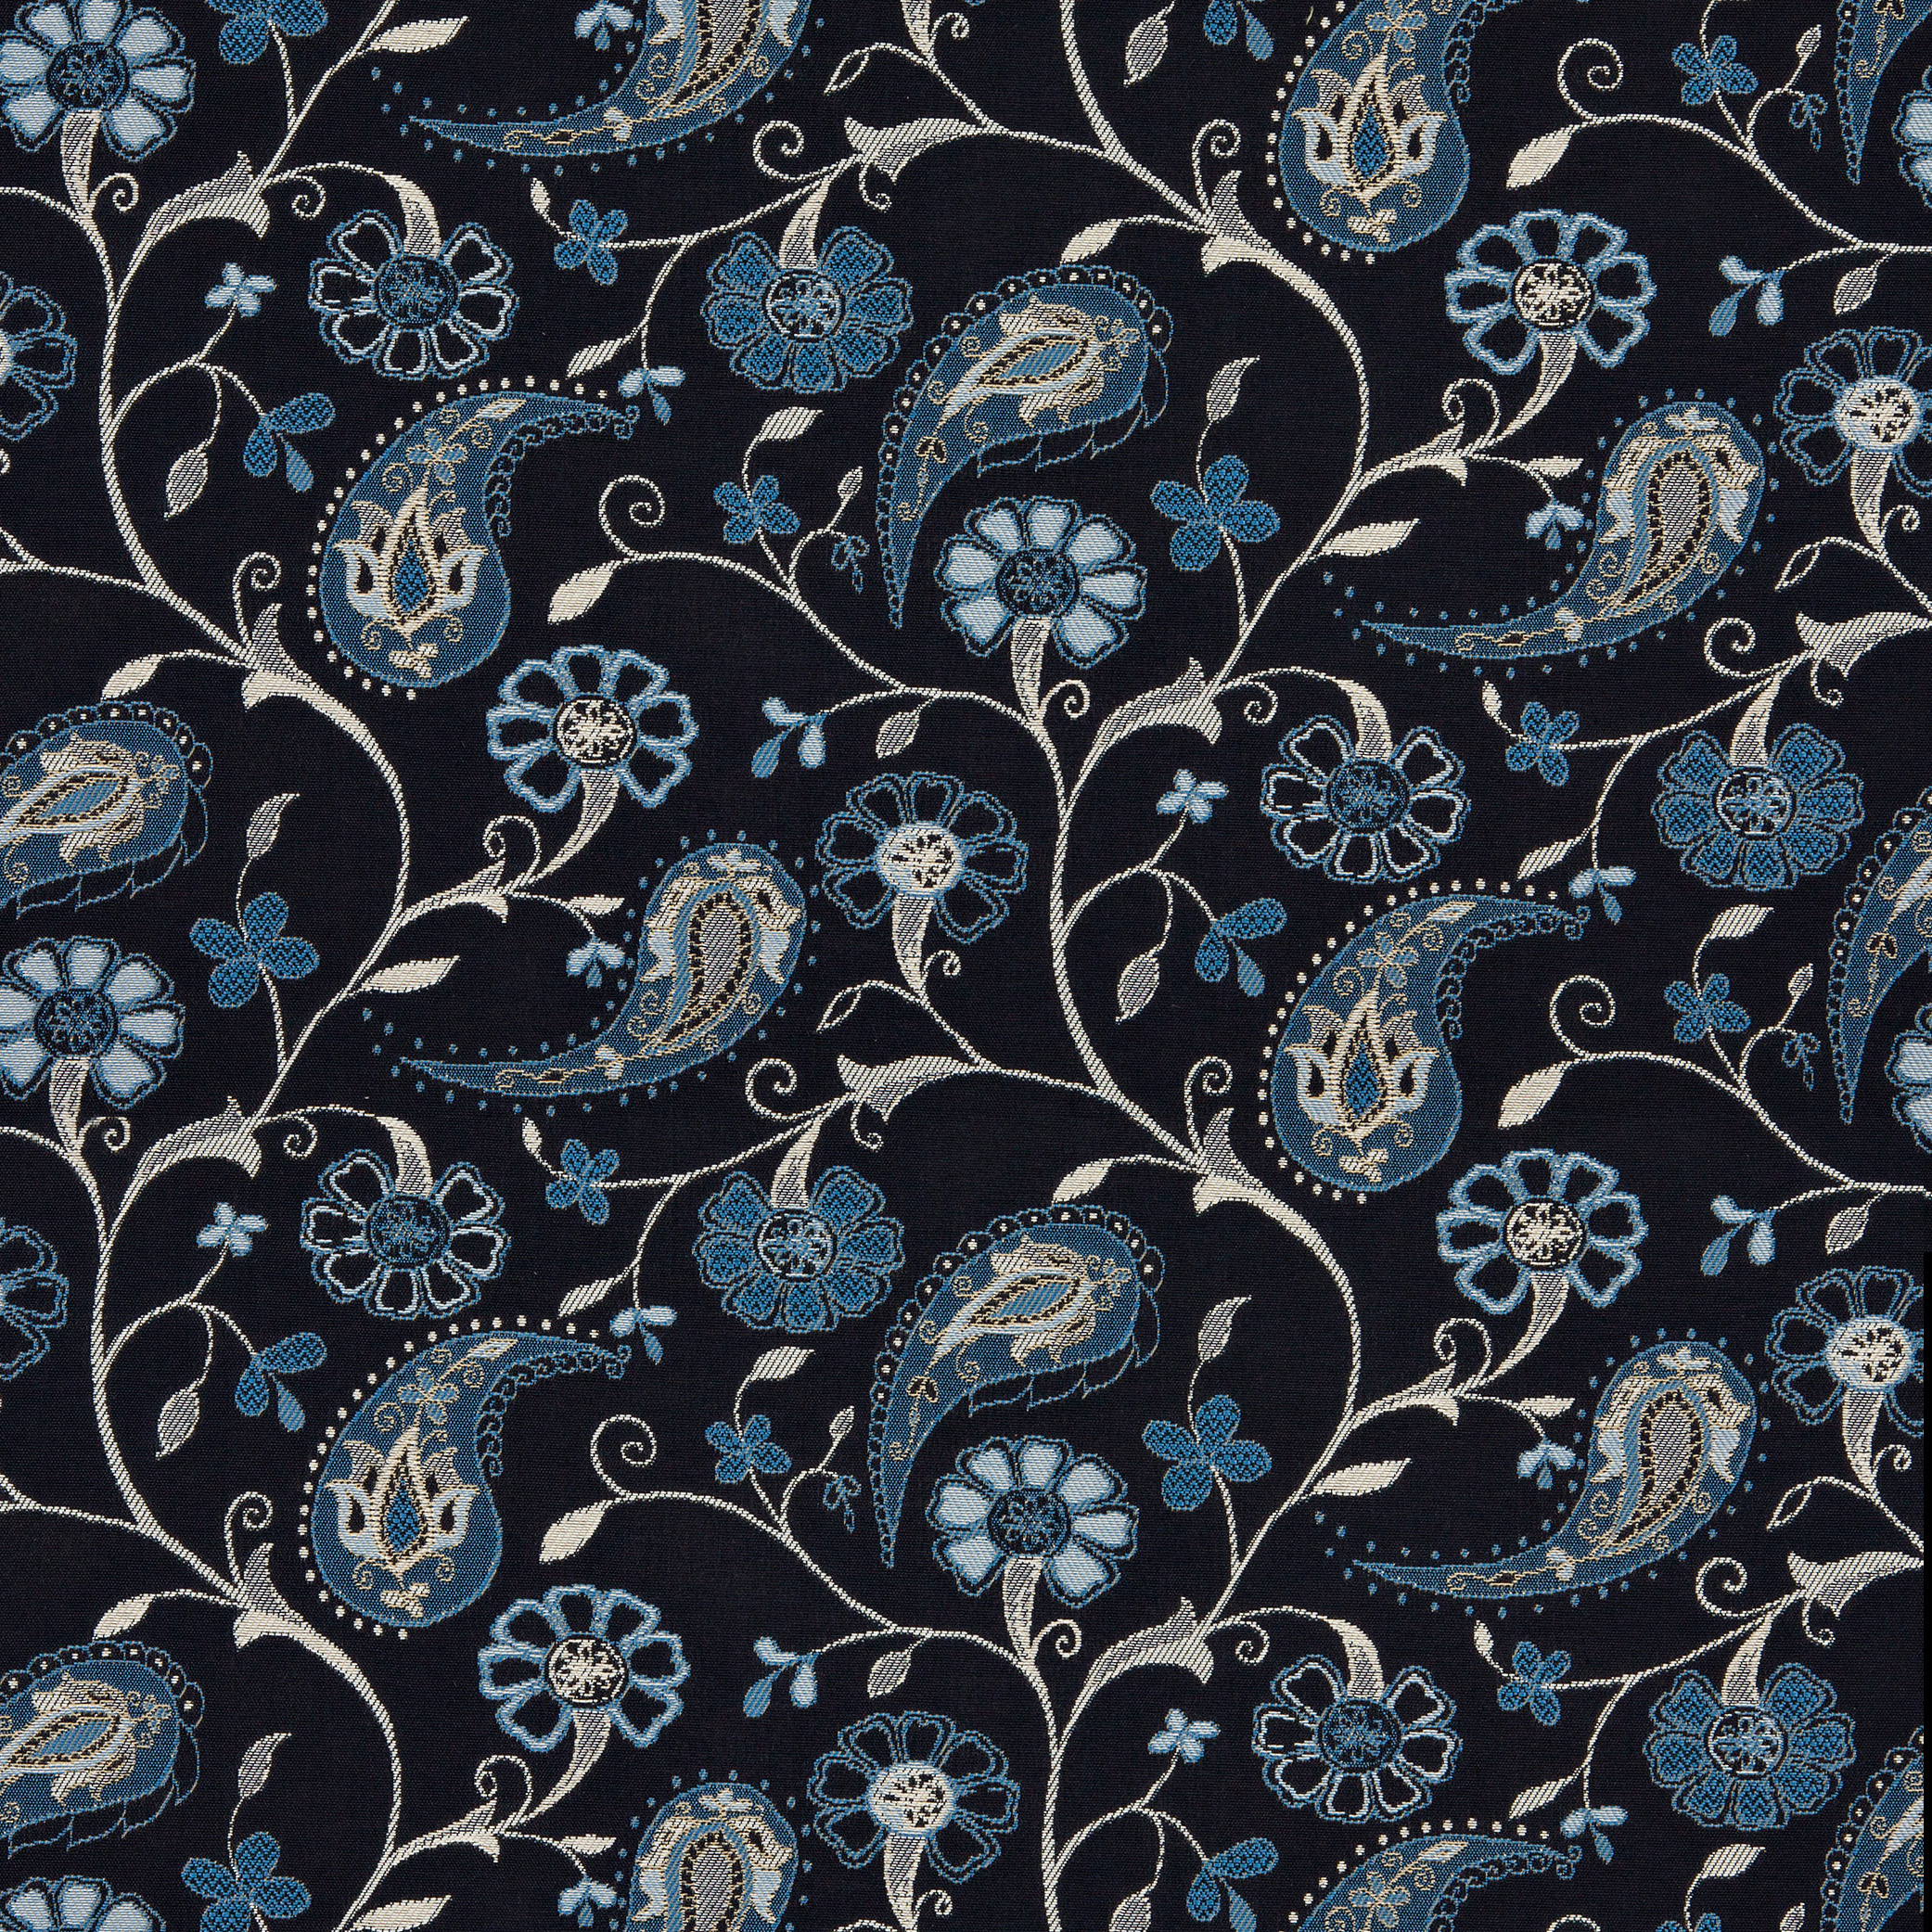 Blue White on Dark Blue Floral and Paisley Damask Upholstery Fabric